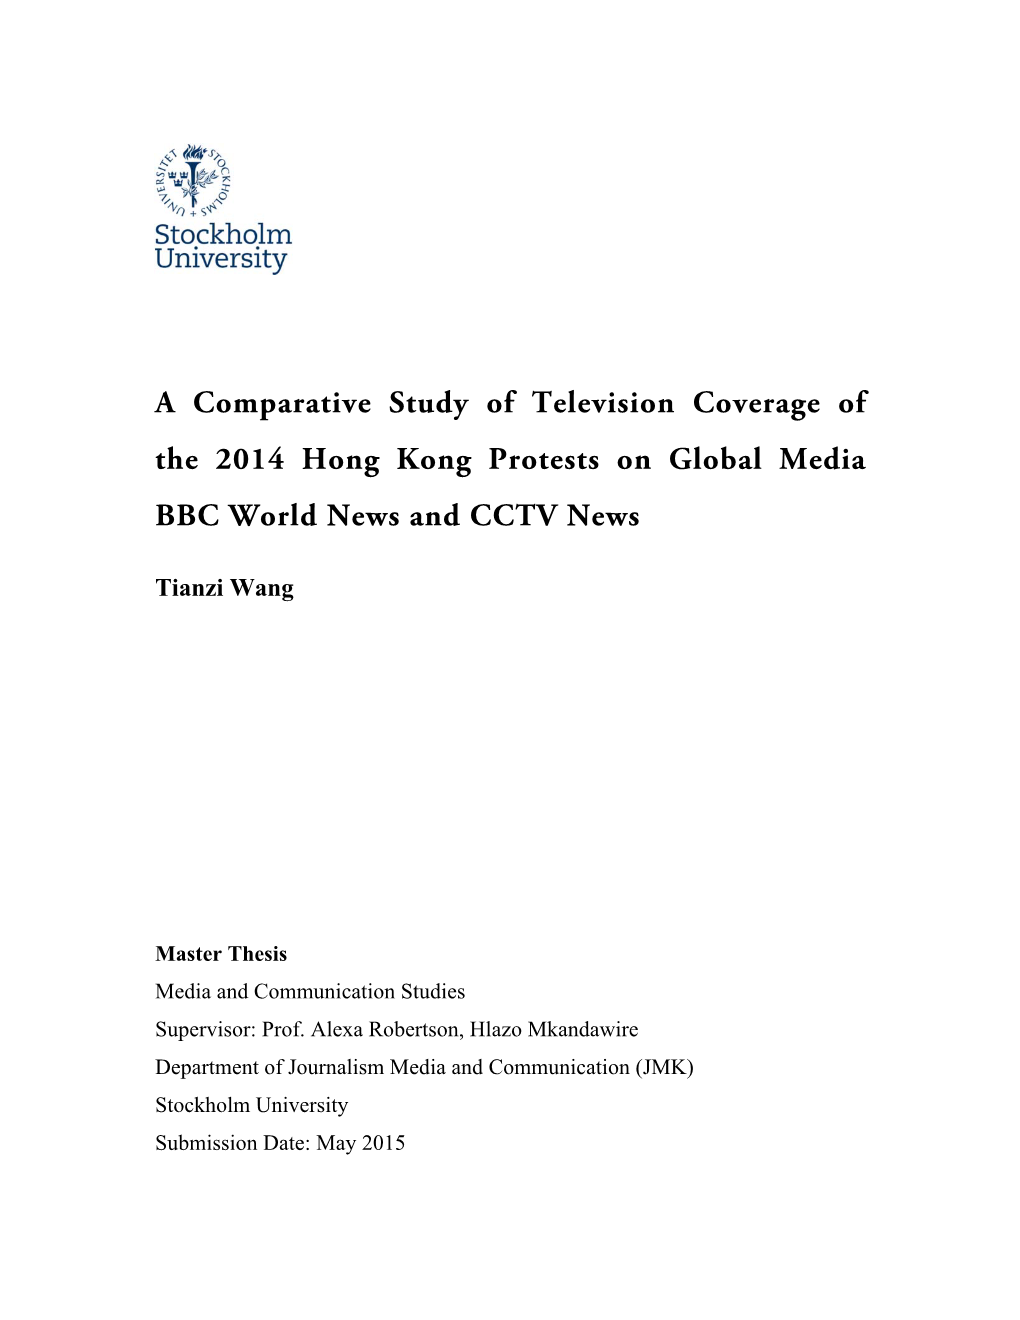 A Comparative Study of Television Coverage of the 2014 Hong Kong Protests on Global Media BBC World News and CCTV News